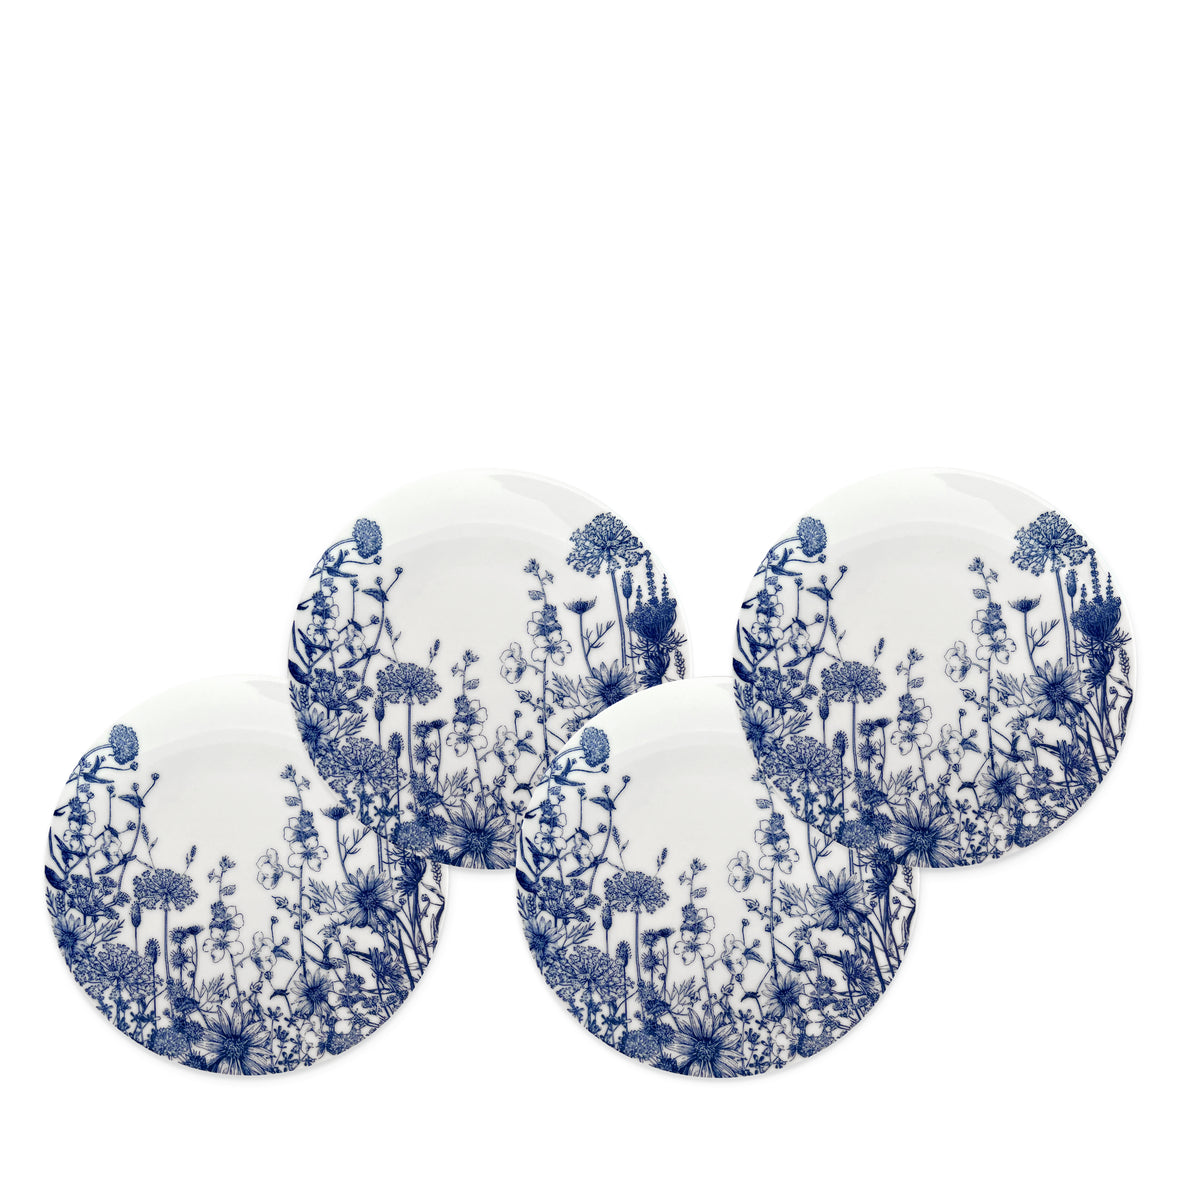 Summer Blues Wildflower Canape Appetizer plates sold as a set of 4 in blue and white porcelain from Caskata